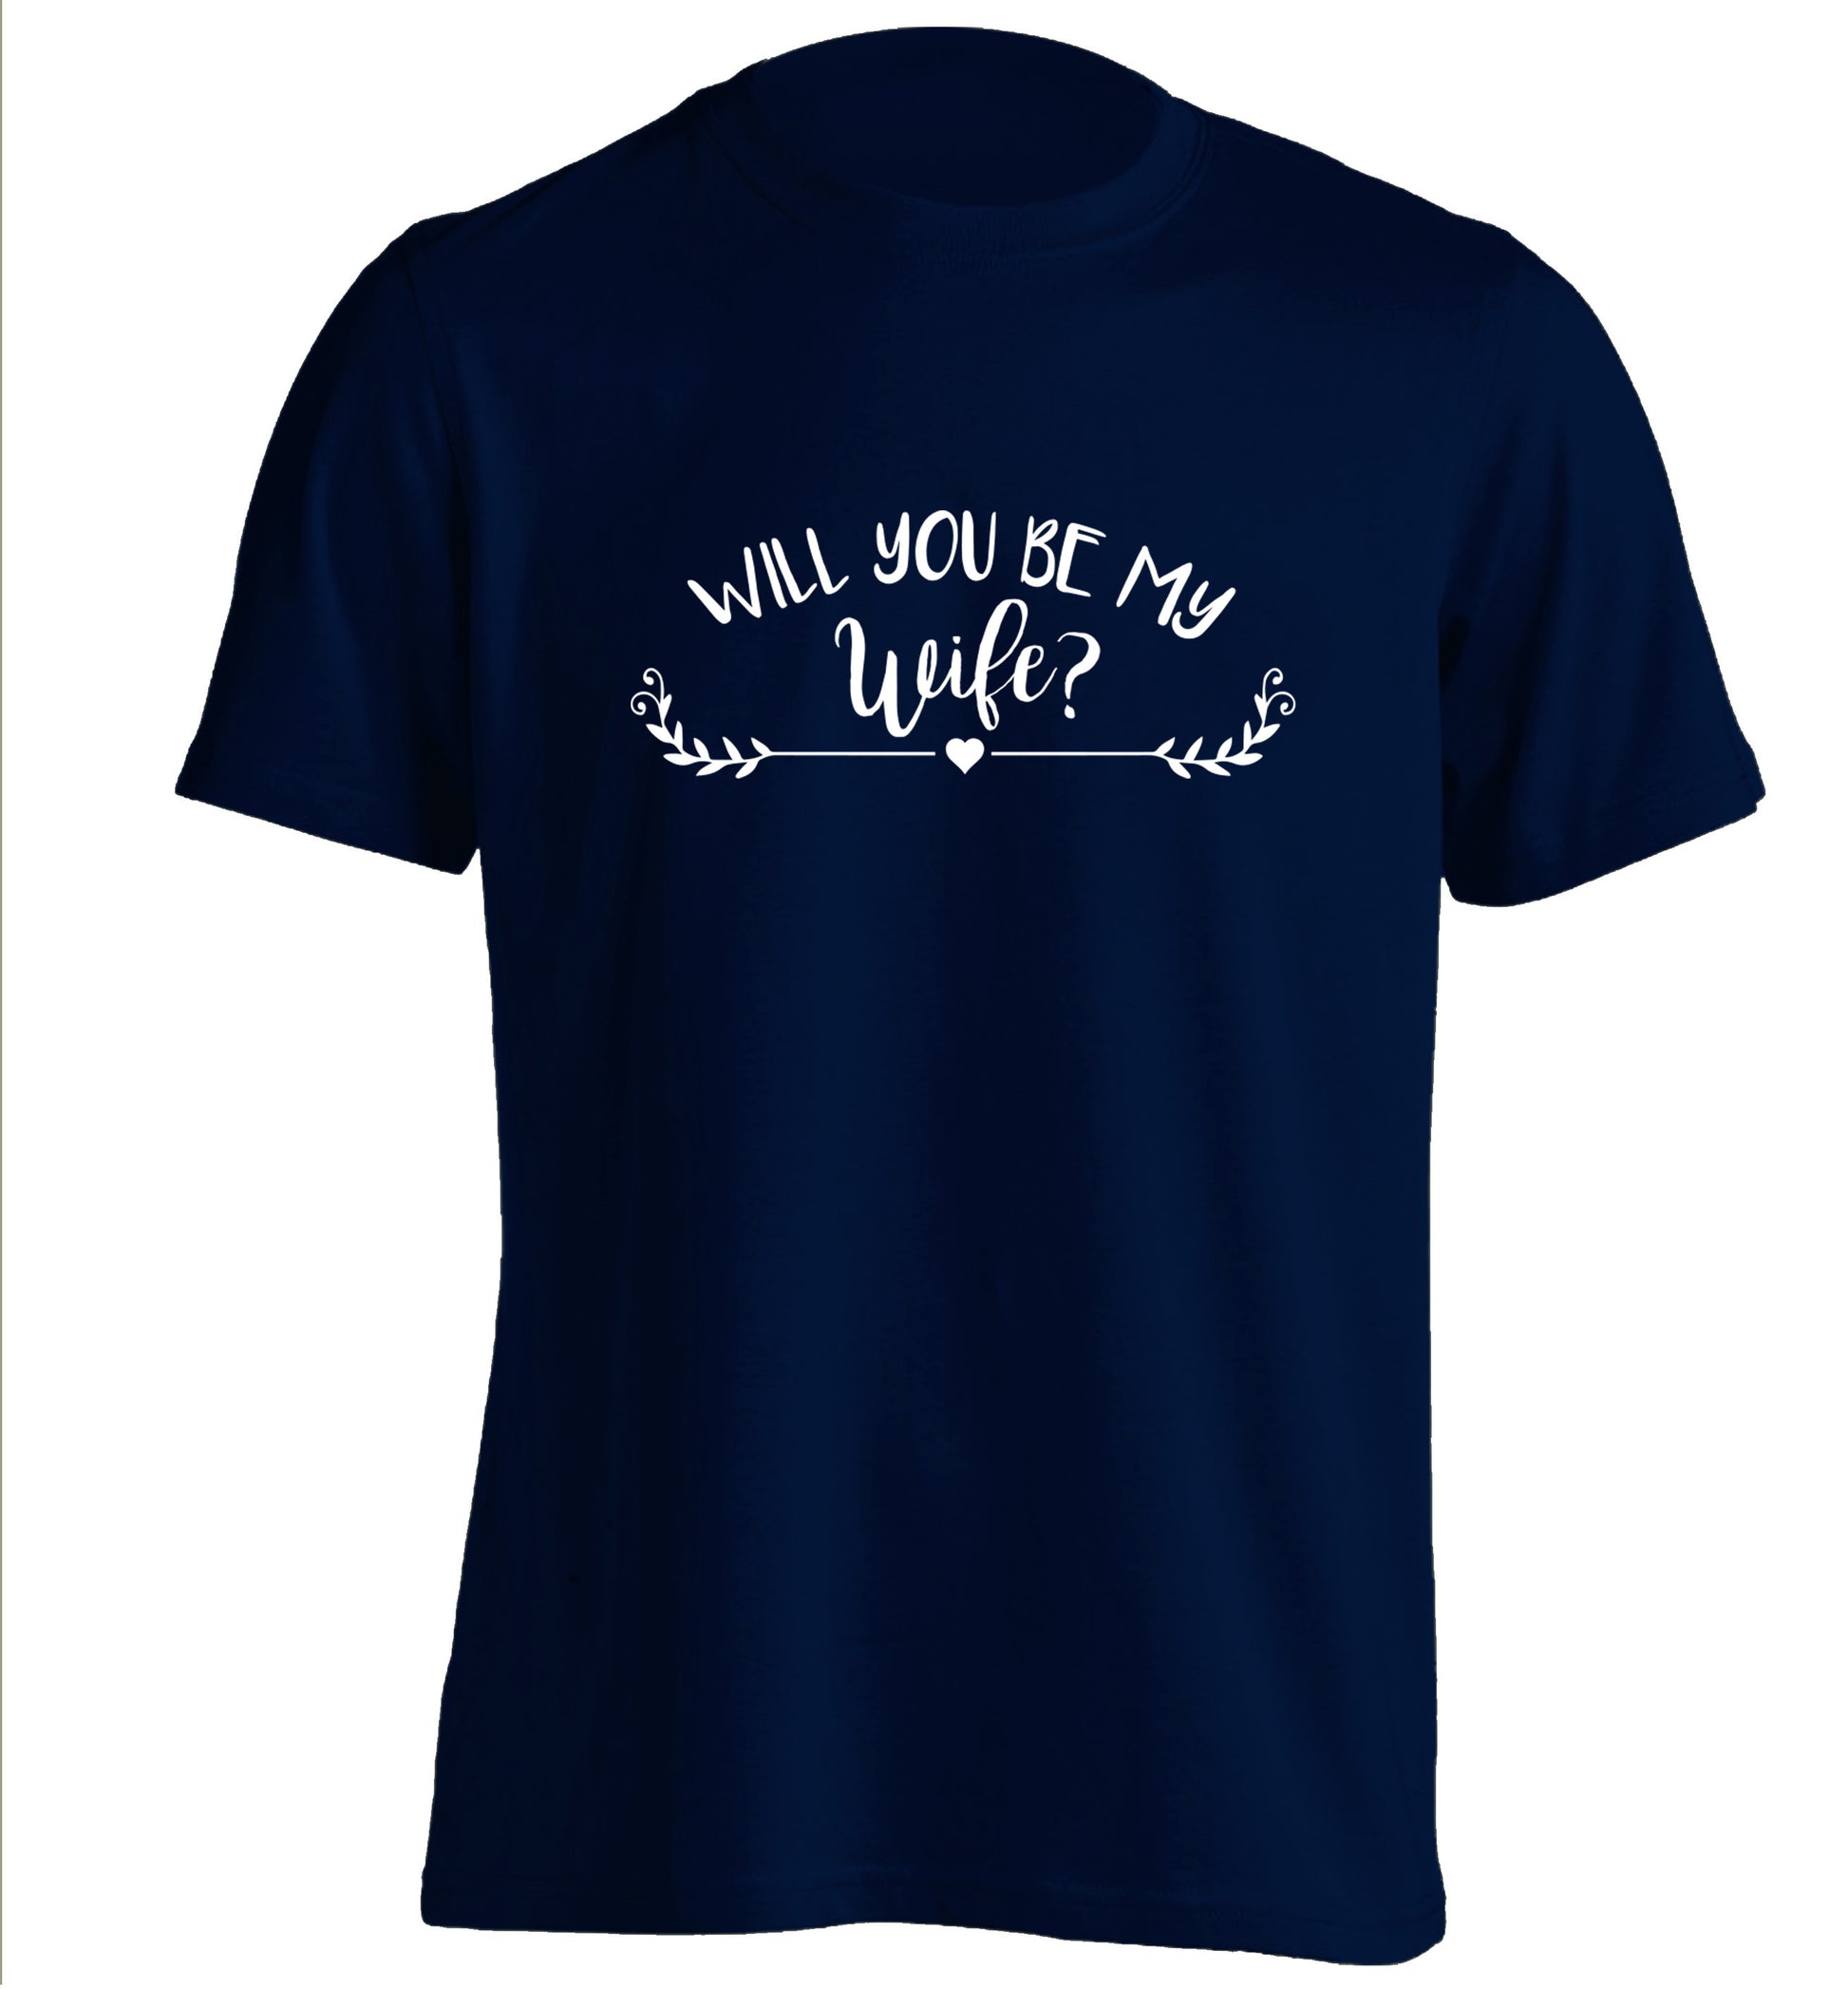 Will you be my wife? adults unisex navy Tshirt 2XL